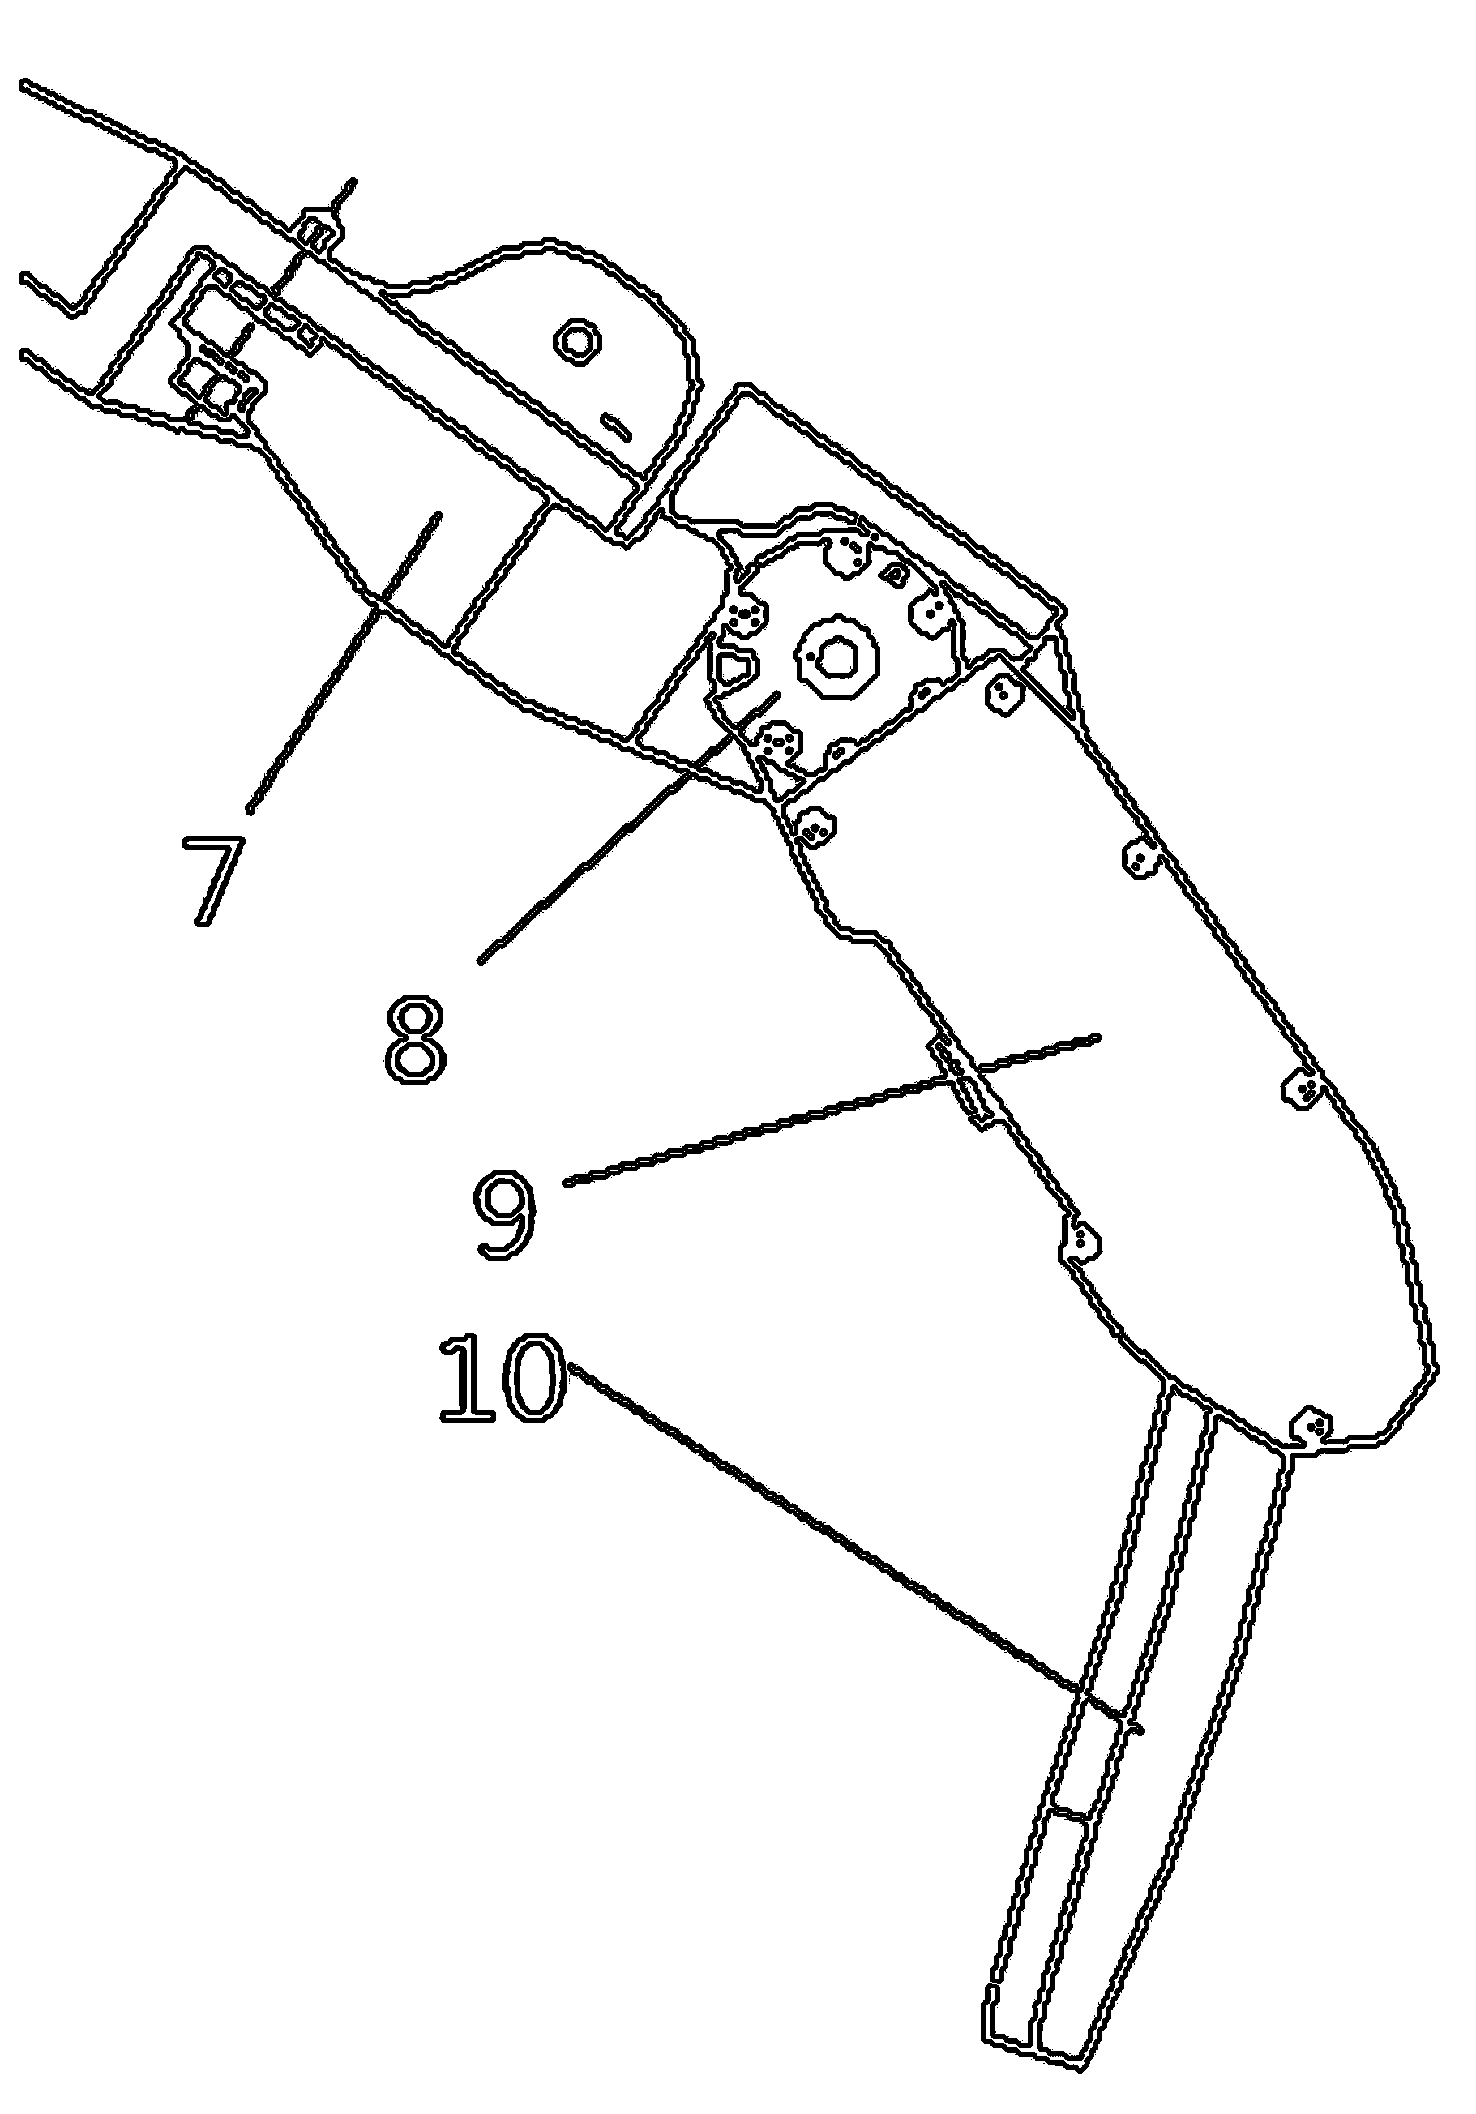 Support assembly for locking structure of rotation arm and combined mirror of onboard head-up display